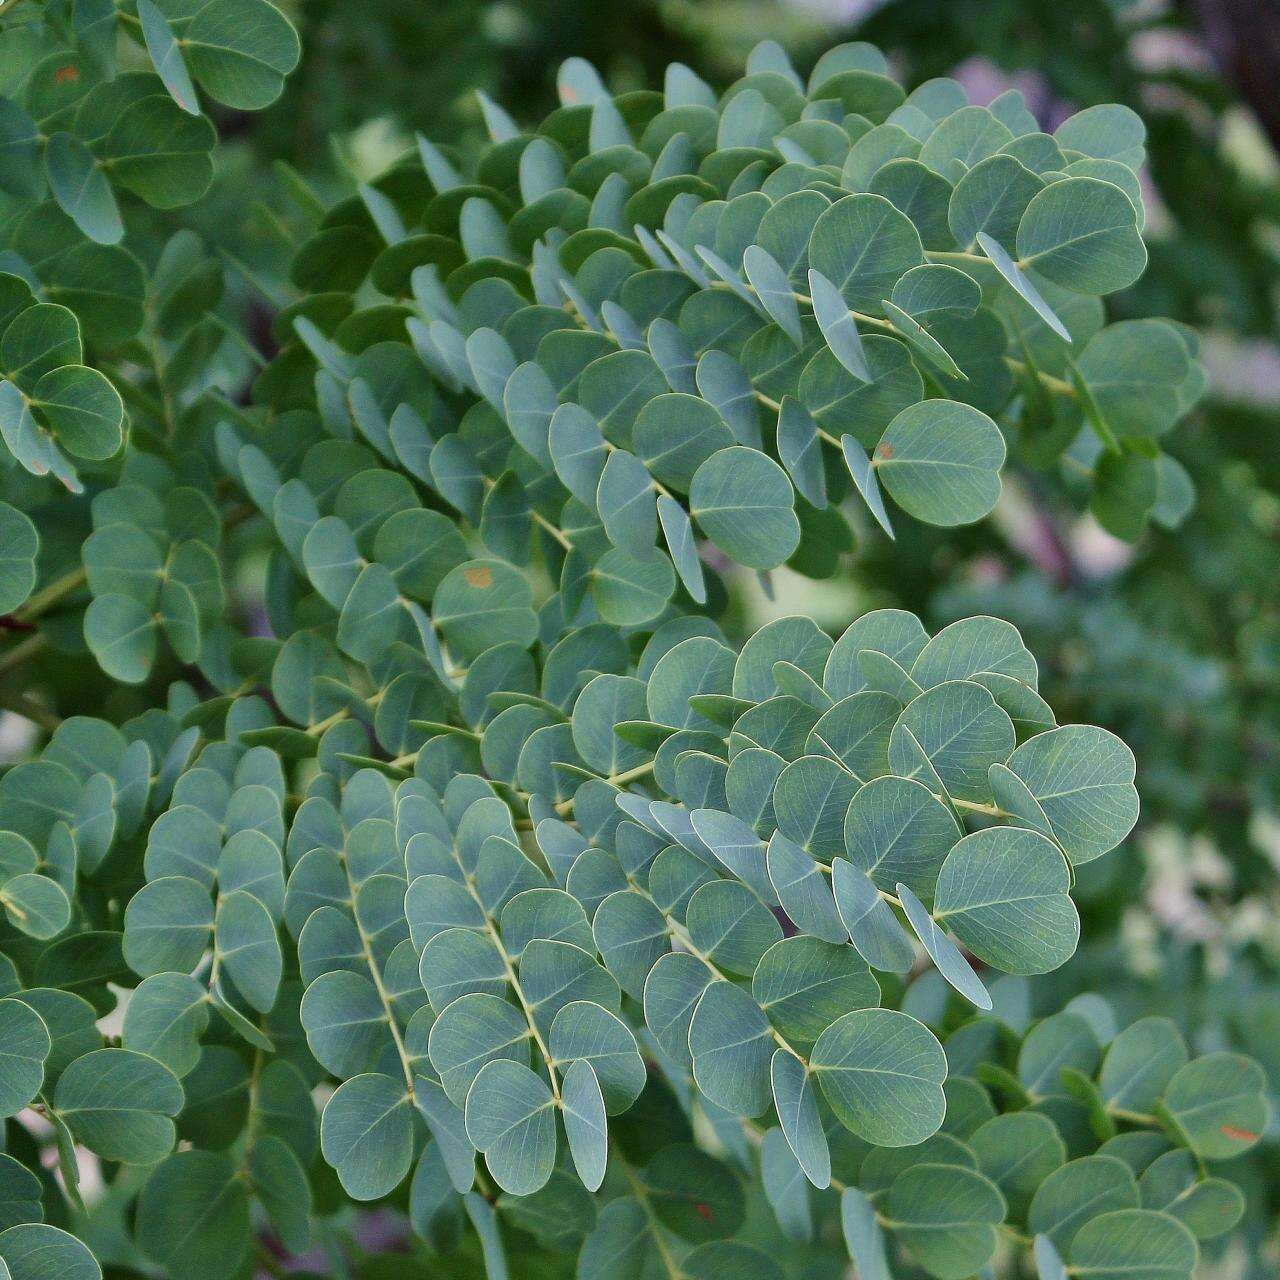 Image of stryphnodendron